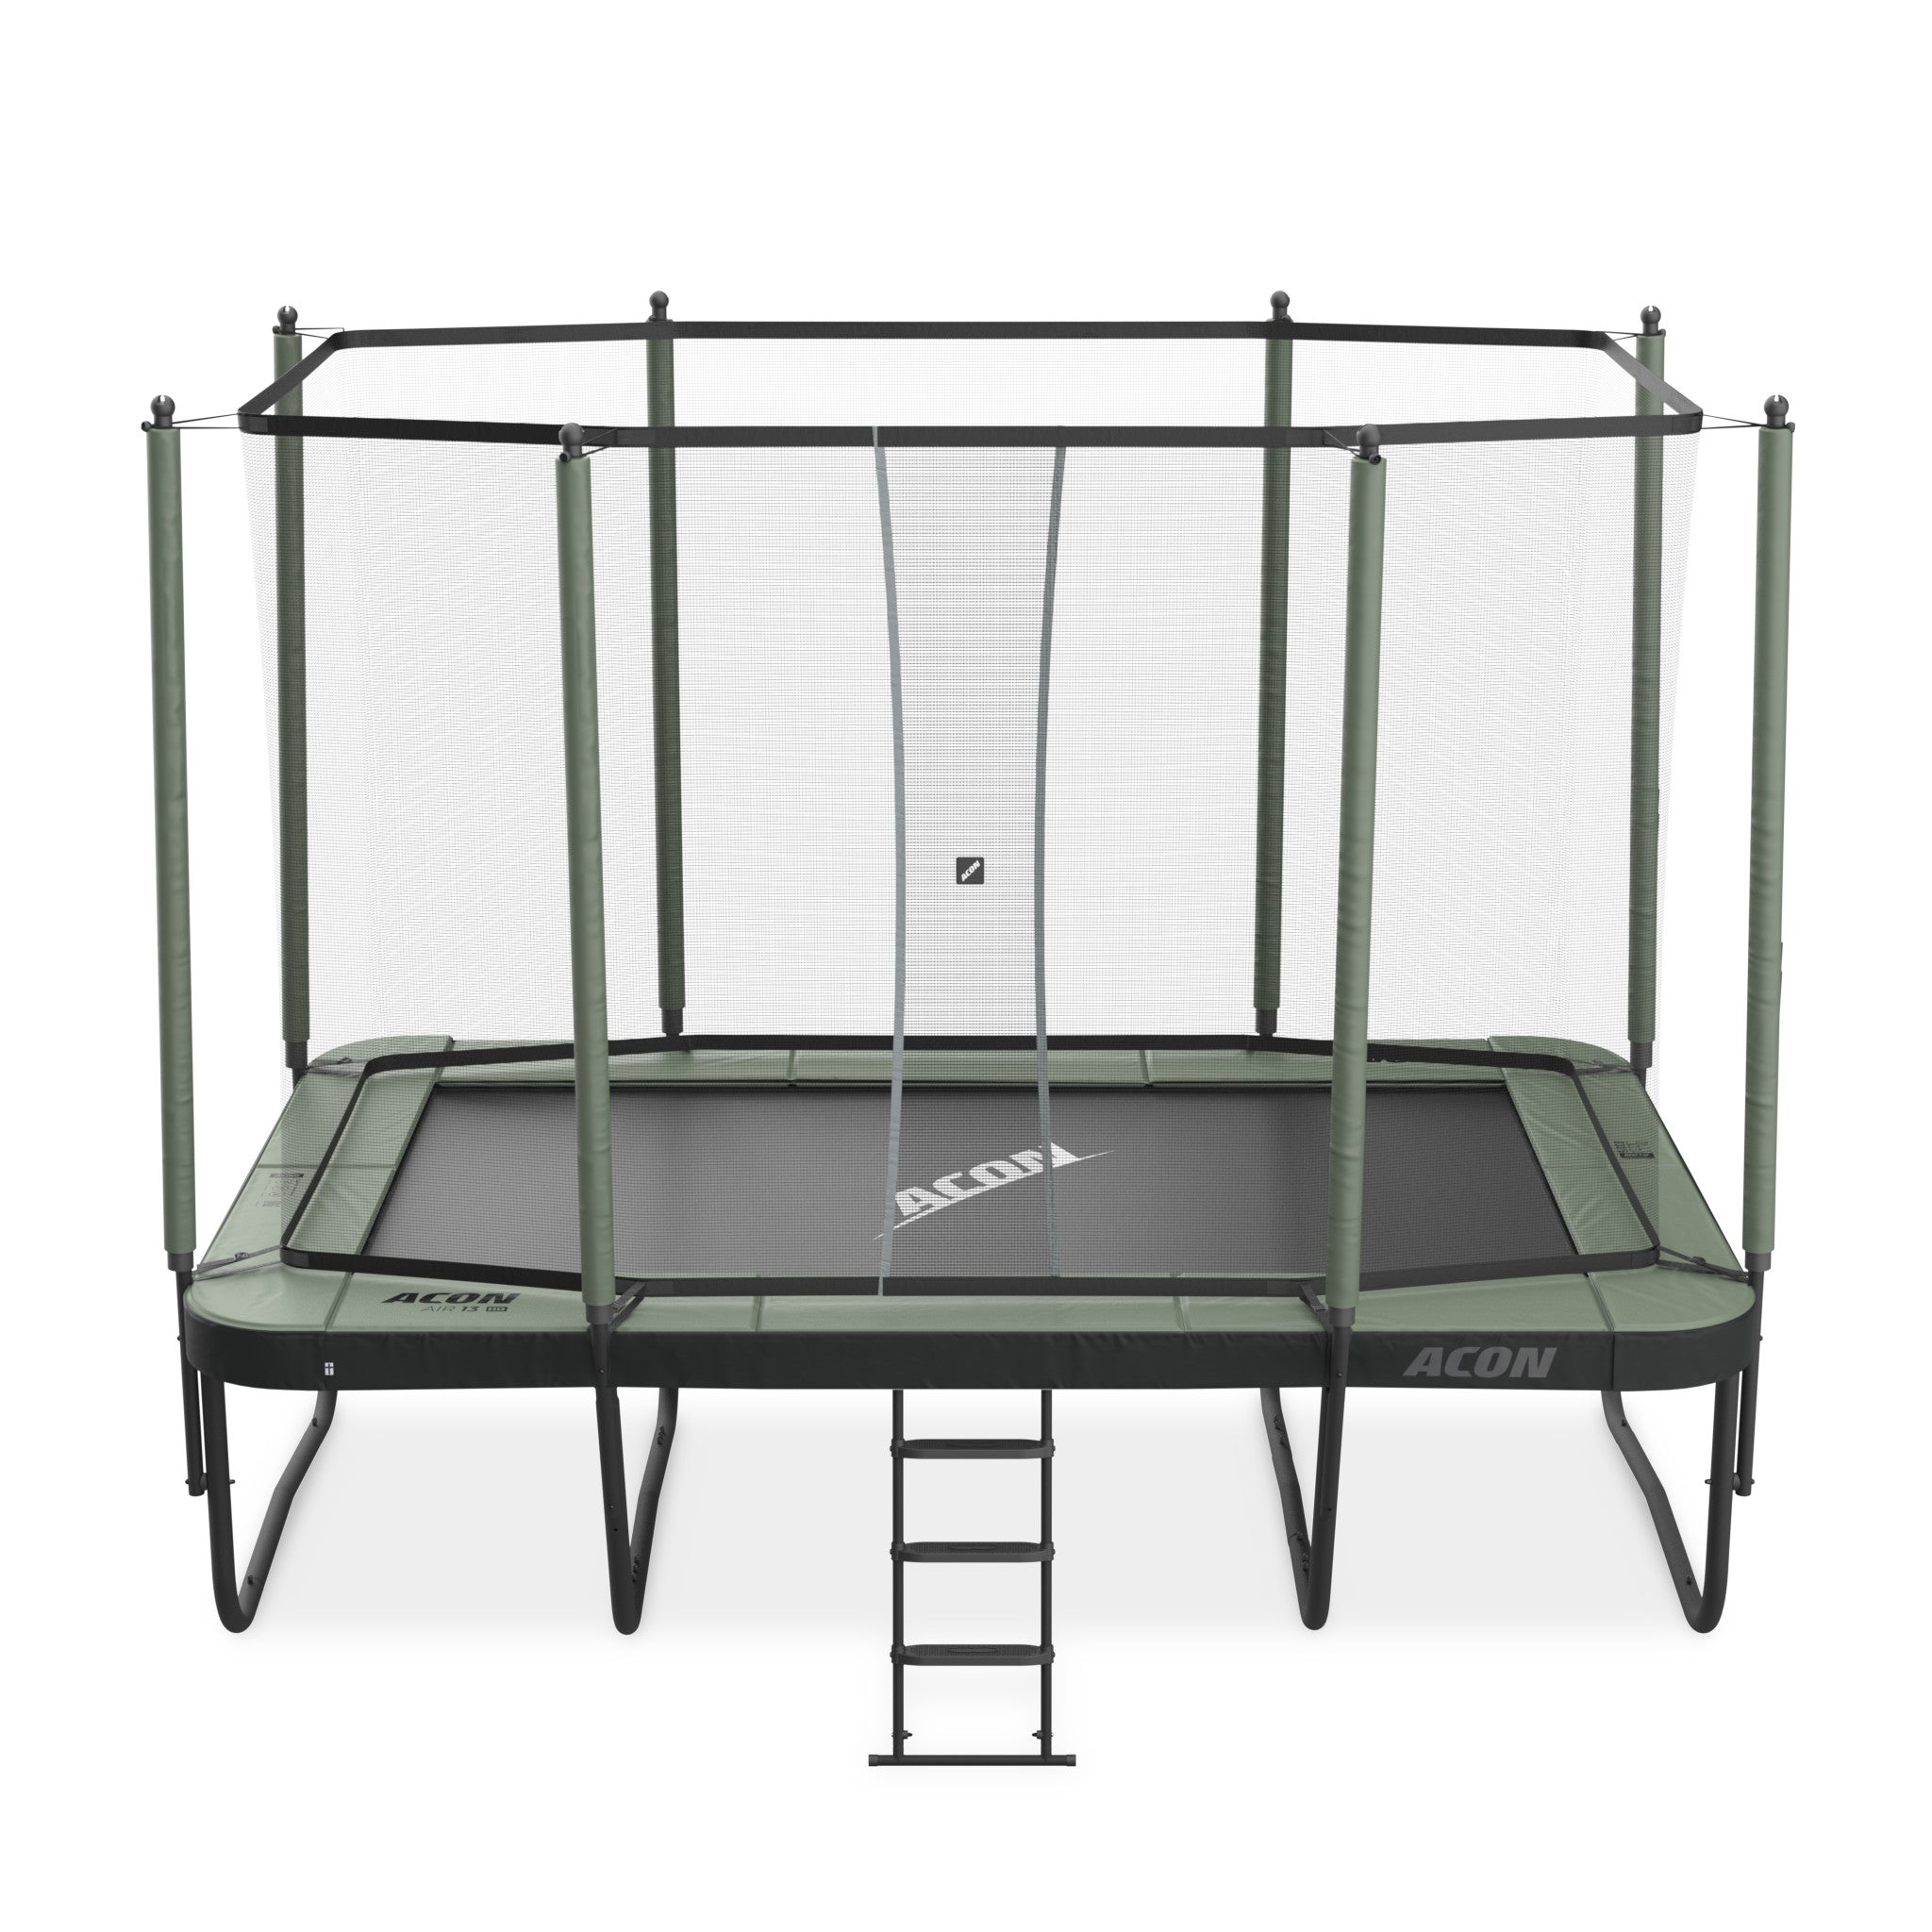 ACON Air 13 Sport HD Trampoline with enclosure and ladder.